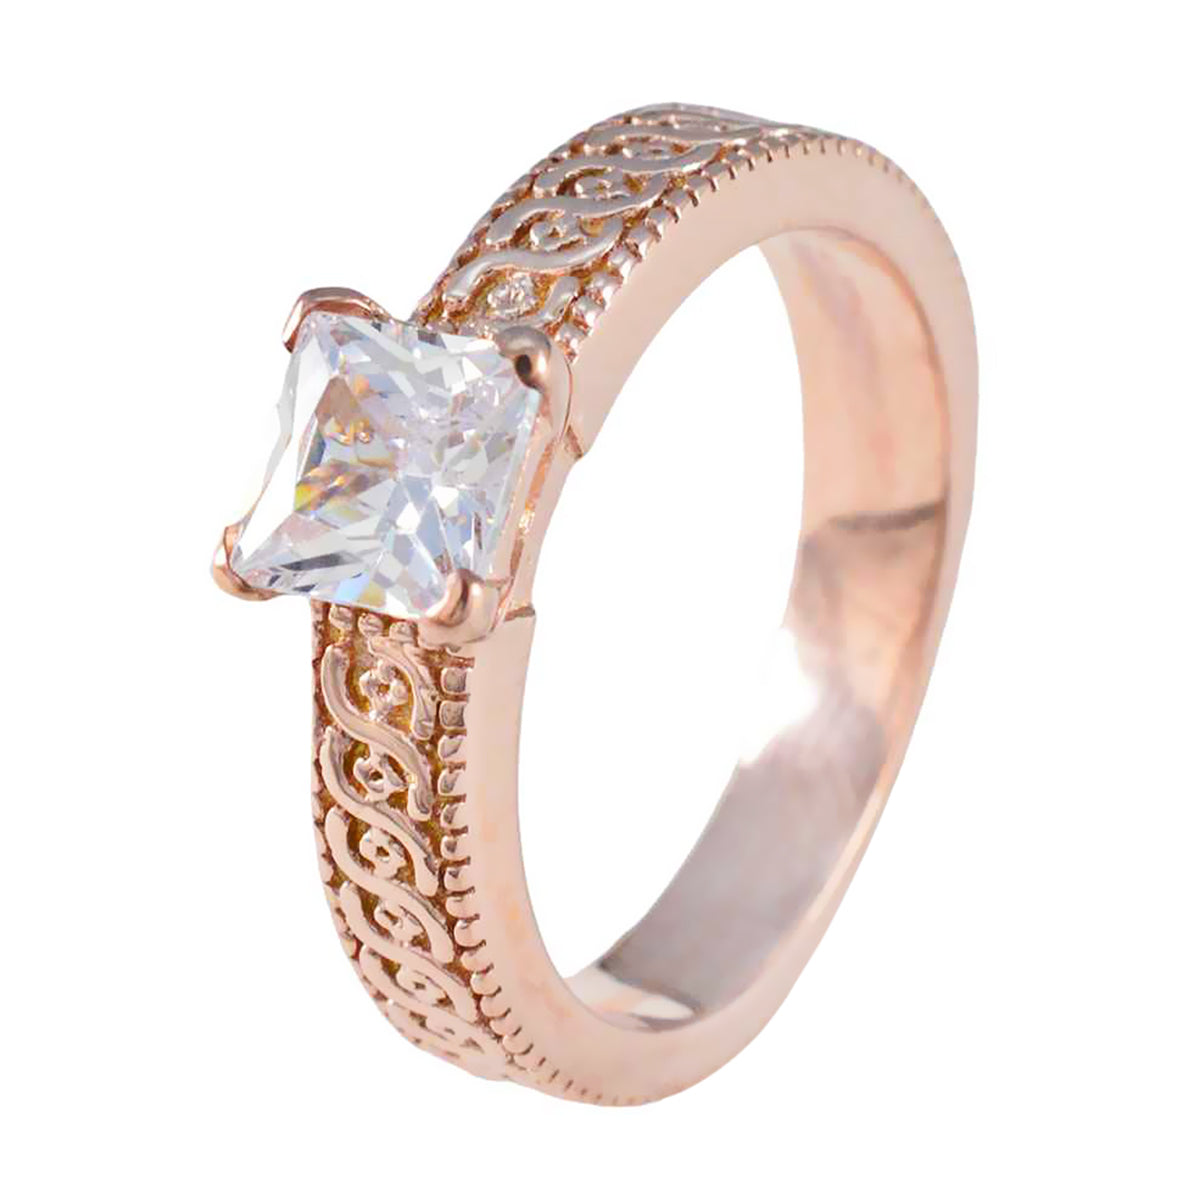 Riyo In Quantity Silver Ring With Rose Gold Plating White CZ Stone square Shape Prong Setting Fashion Jewelry Easter Ring